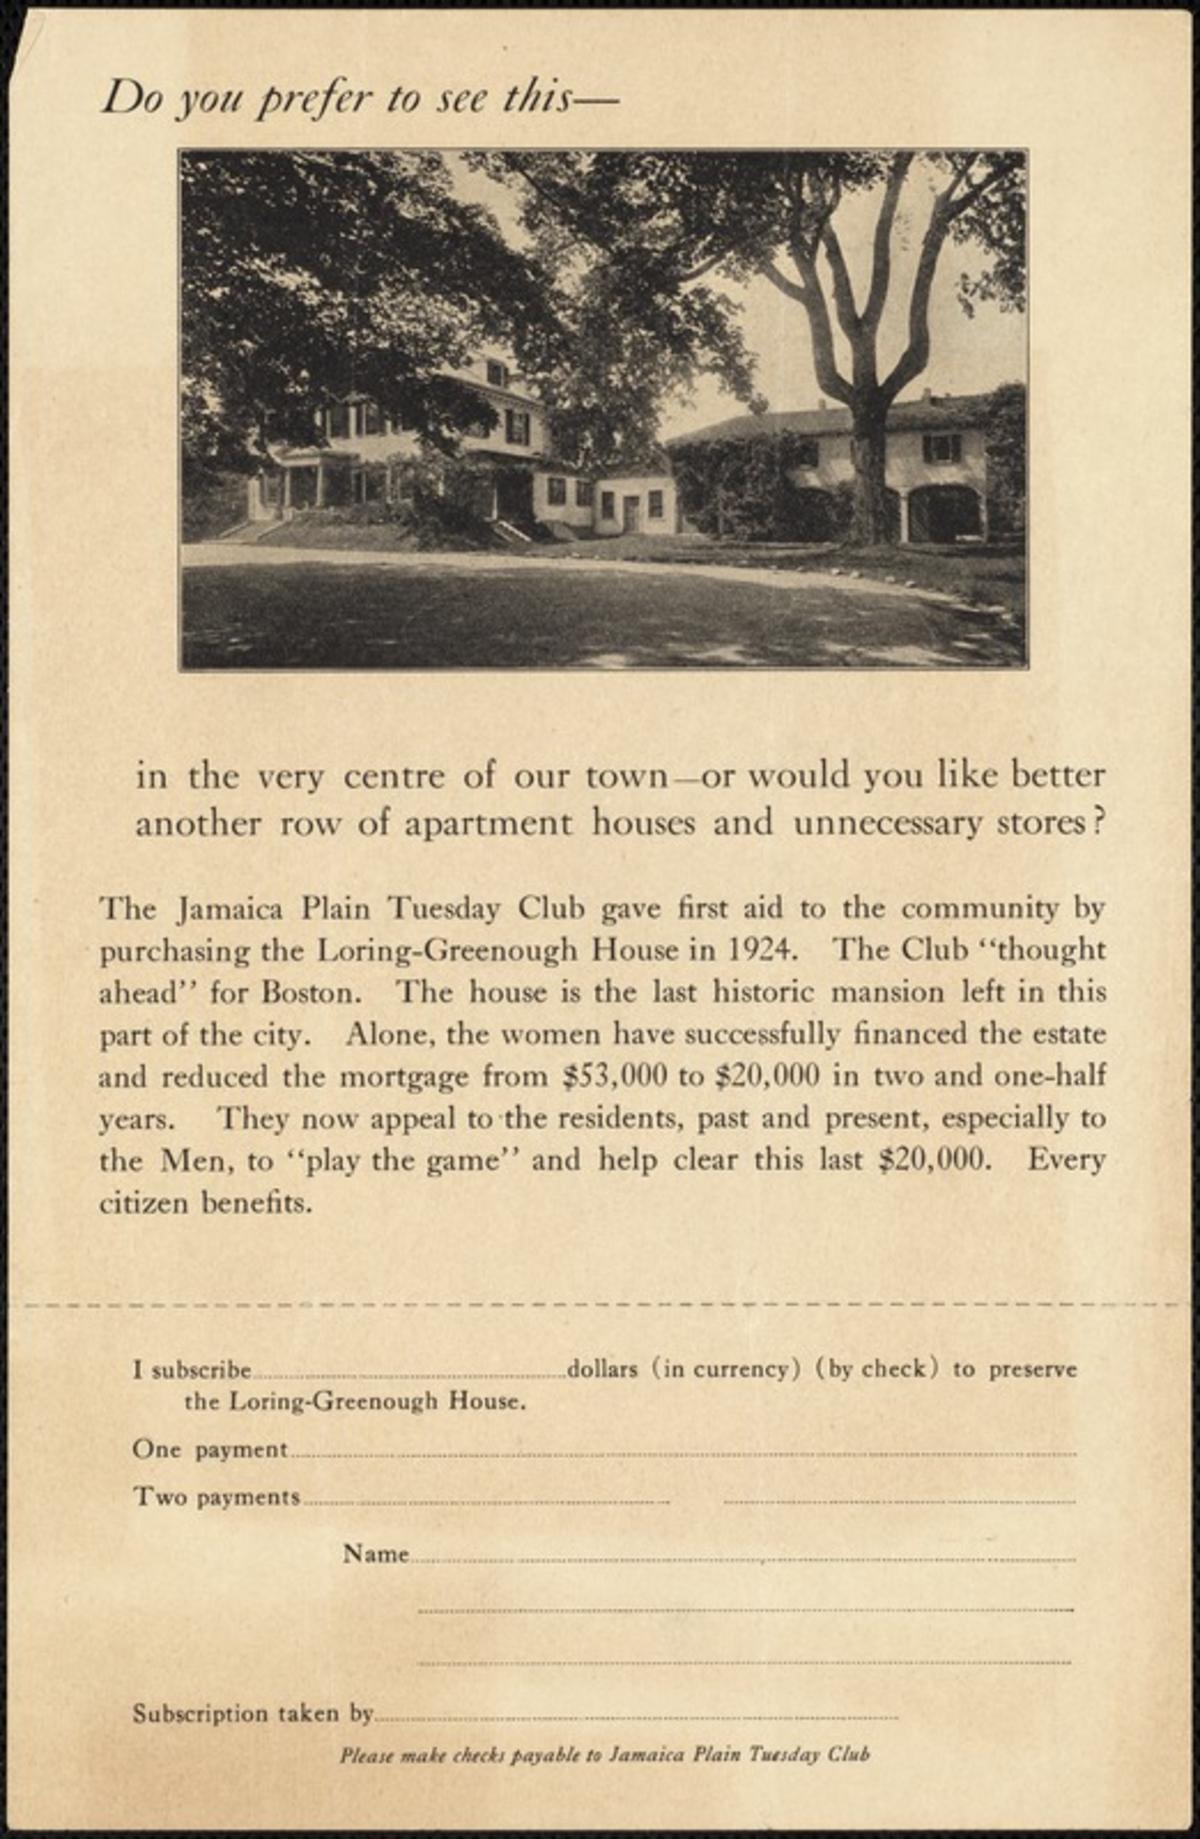 “Do you prefer to see this?” flyer, 1926-1927, Jamaica Plain Tuesday Club/Loring-Greenough House